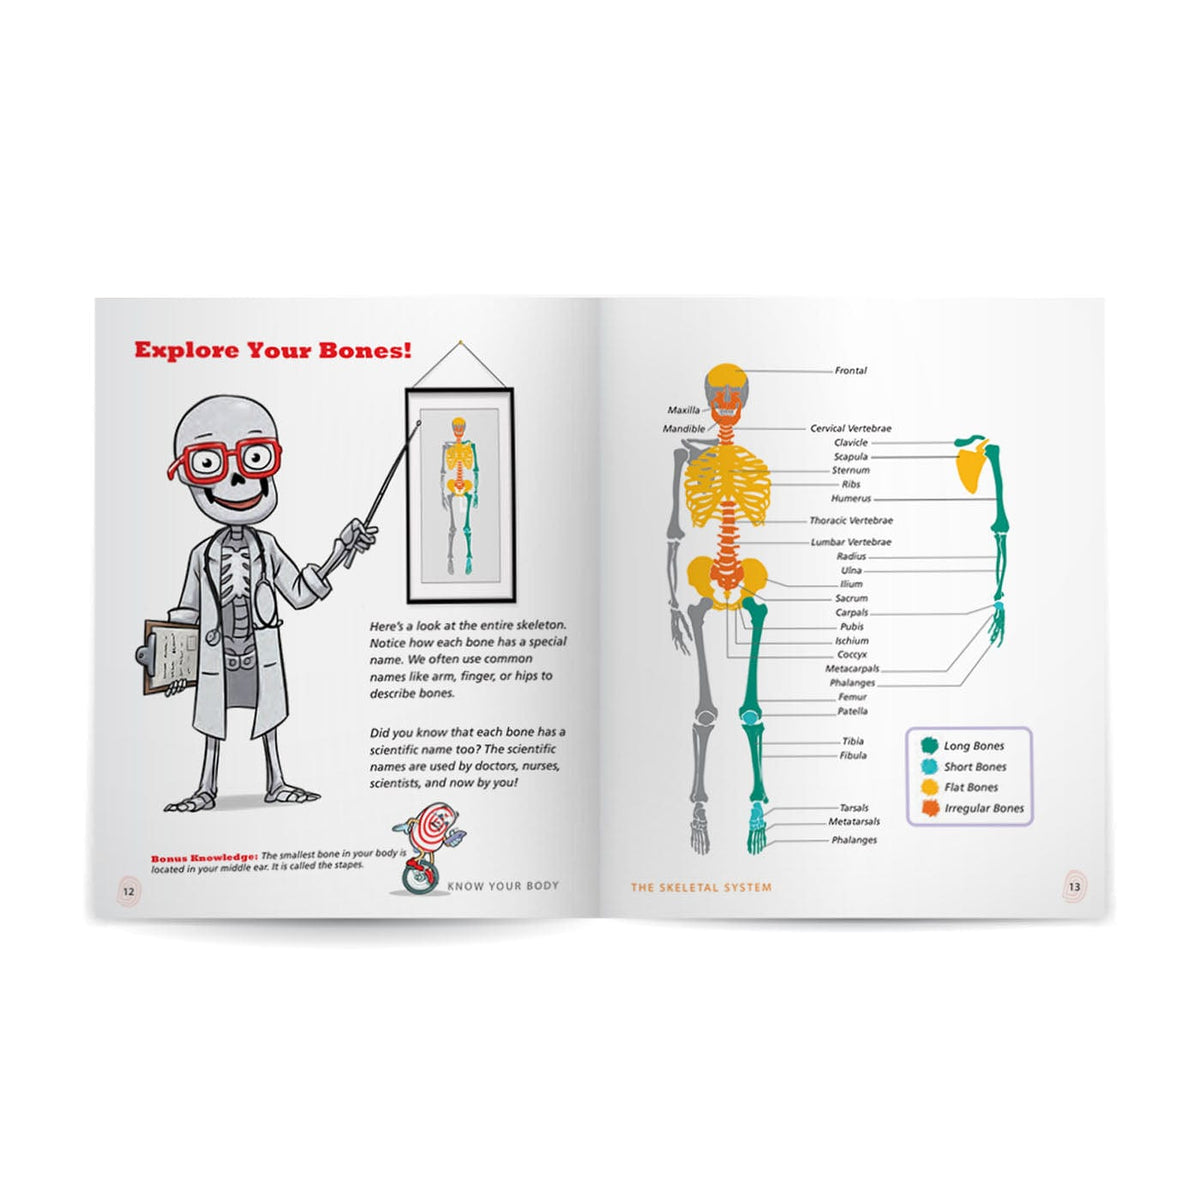 Skeletal System: Know Your Body Health Education for Children